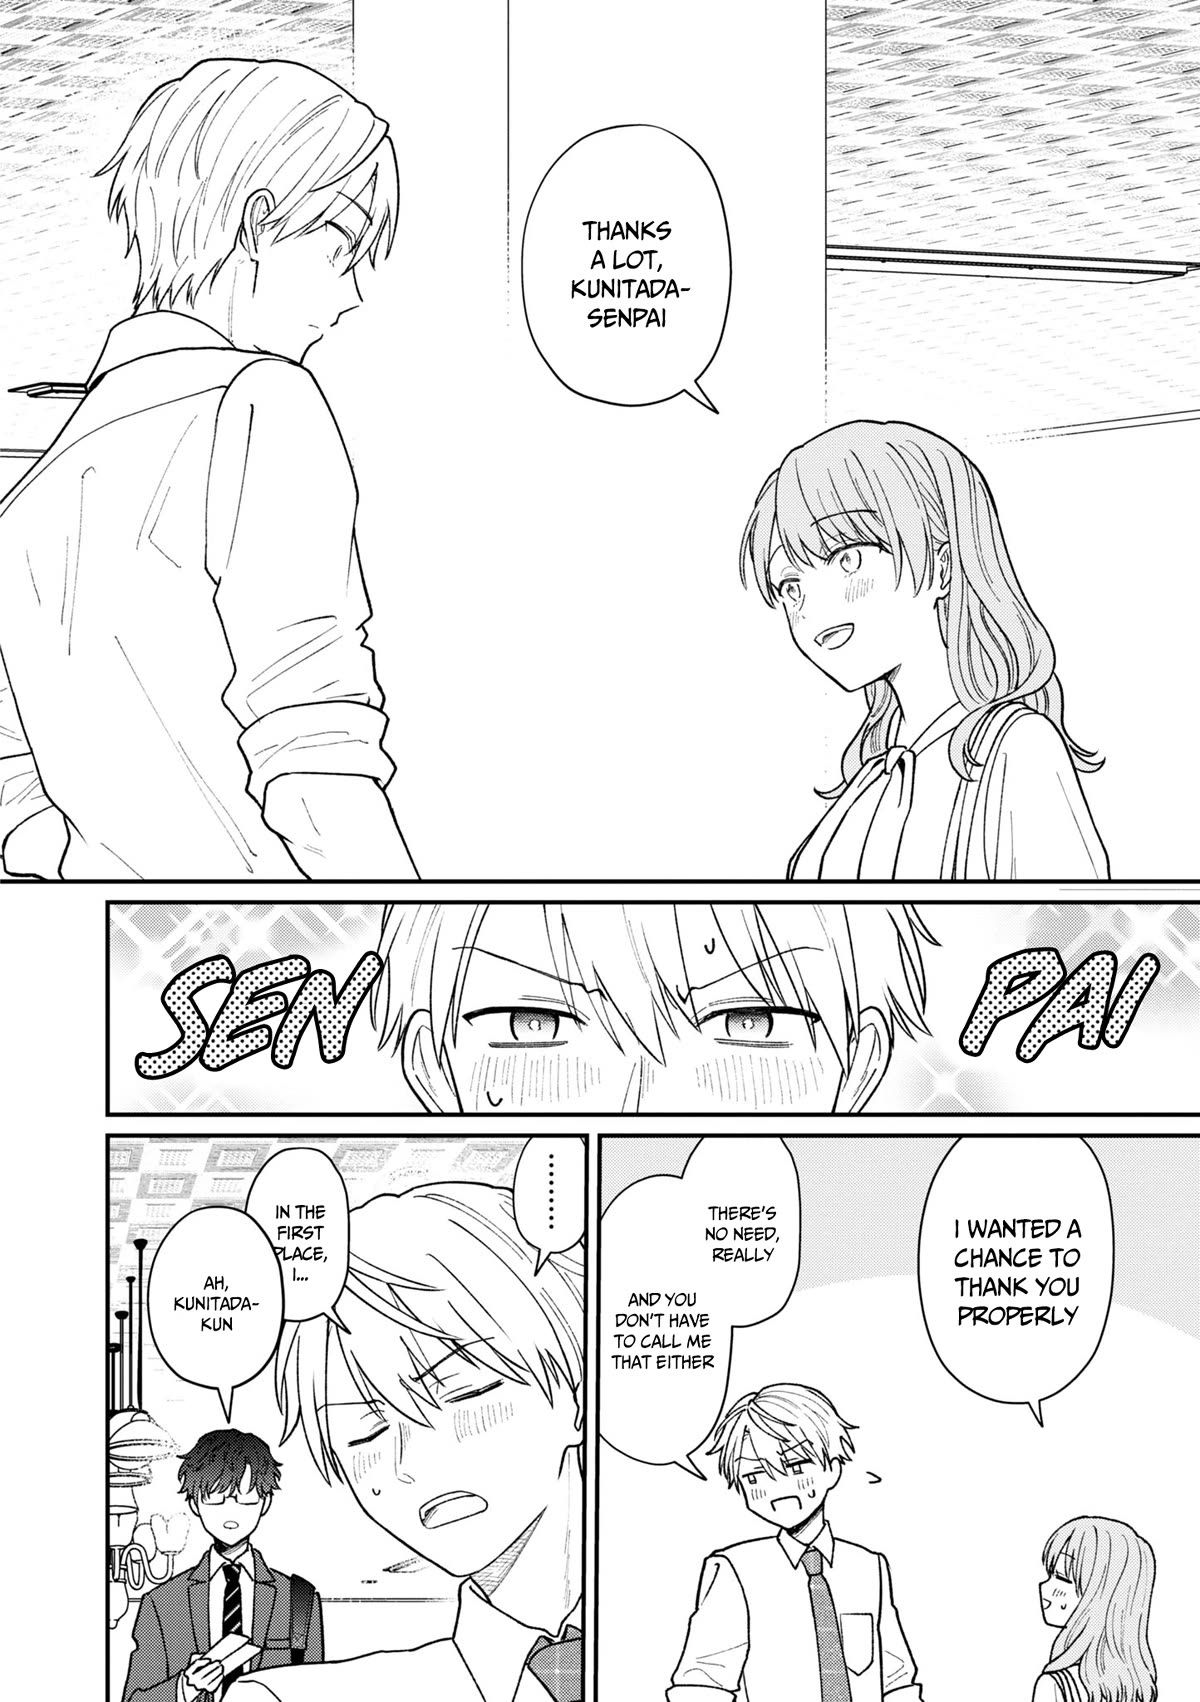 The New-Hire Who Could "Read" Emotions and the Unsociable Senpai - chapter 32.5 - #5